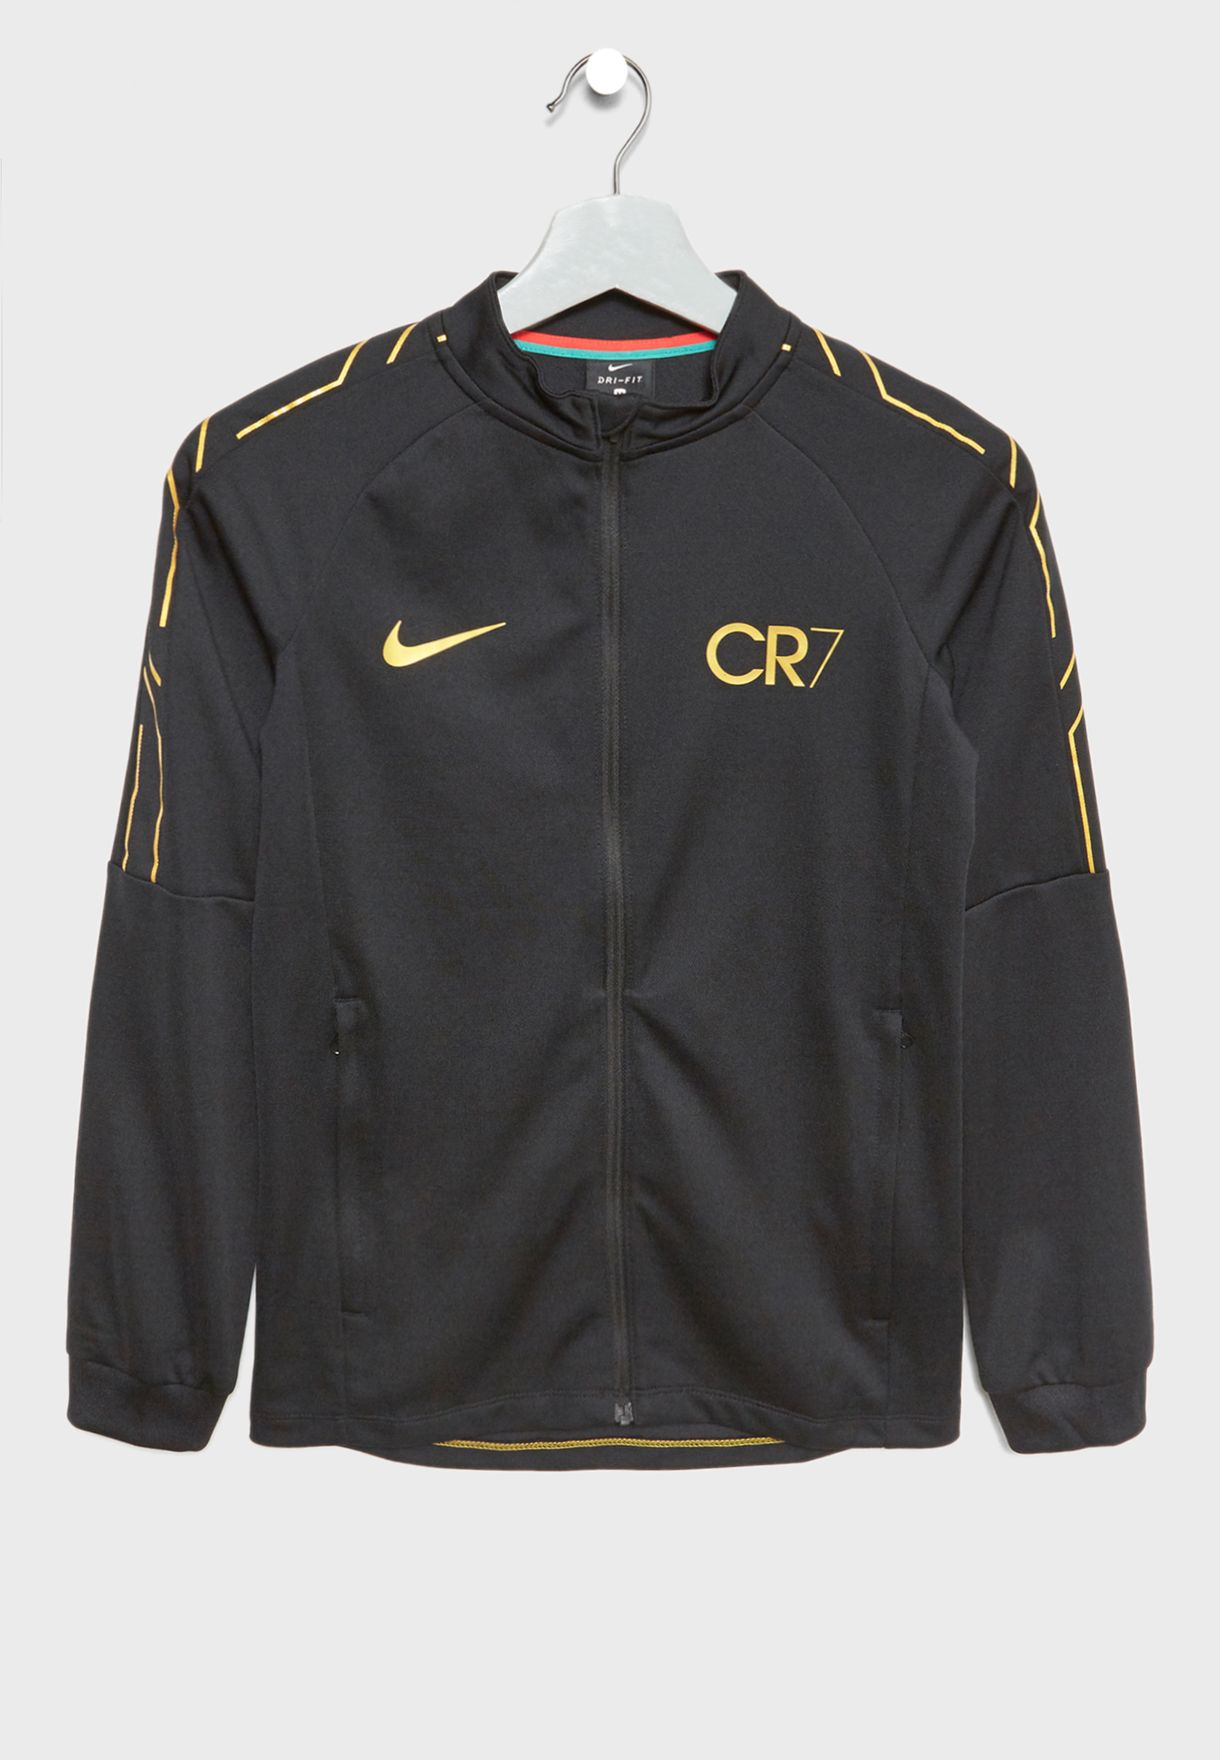 cr7 tracksuit black and gold